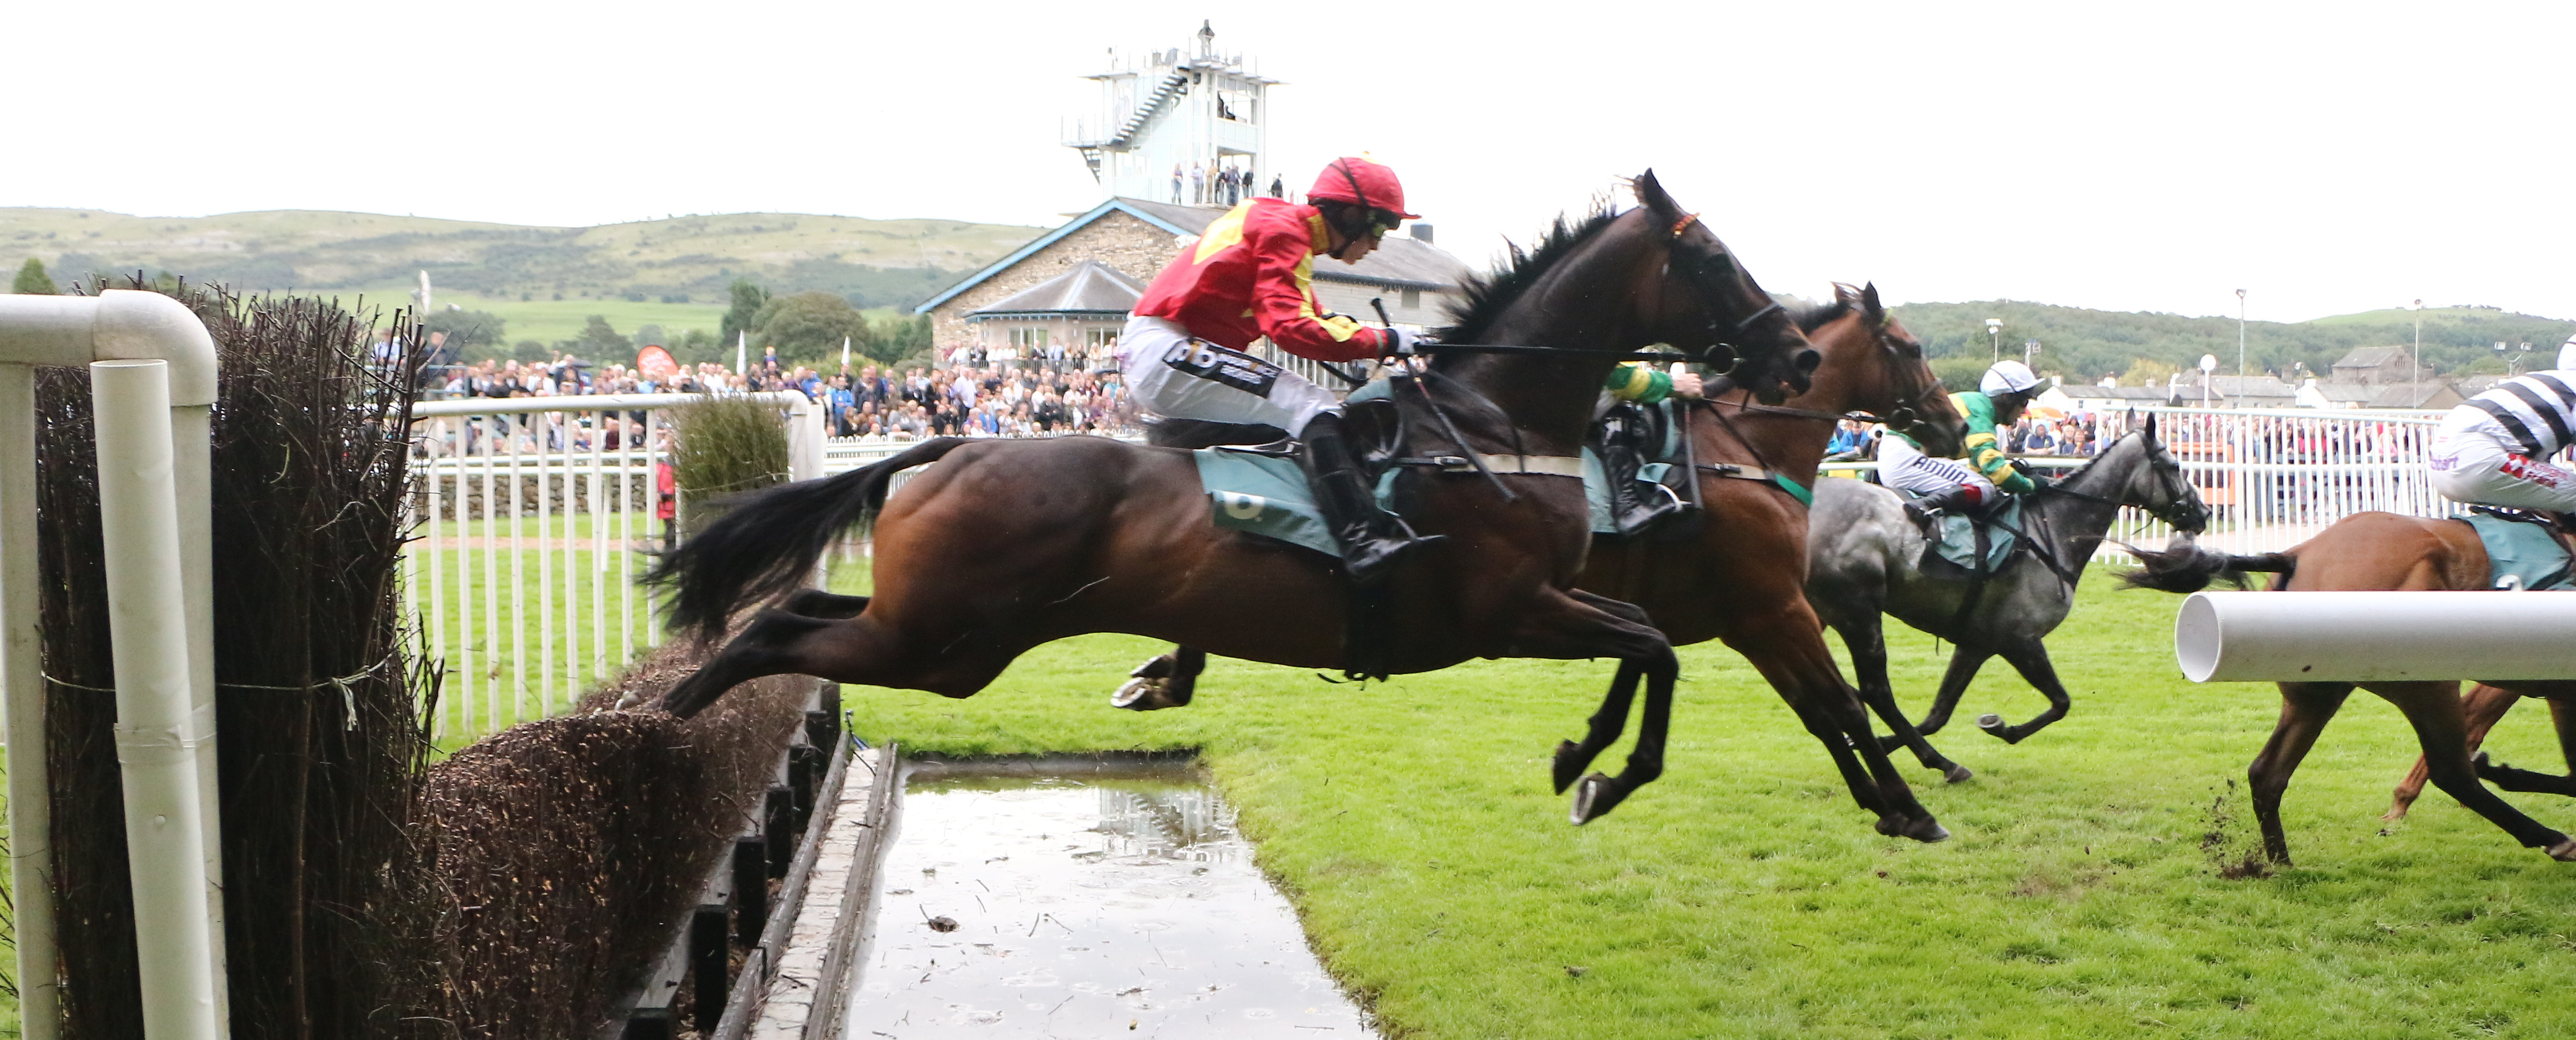 Jumping the fences at Cartmel Races